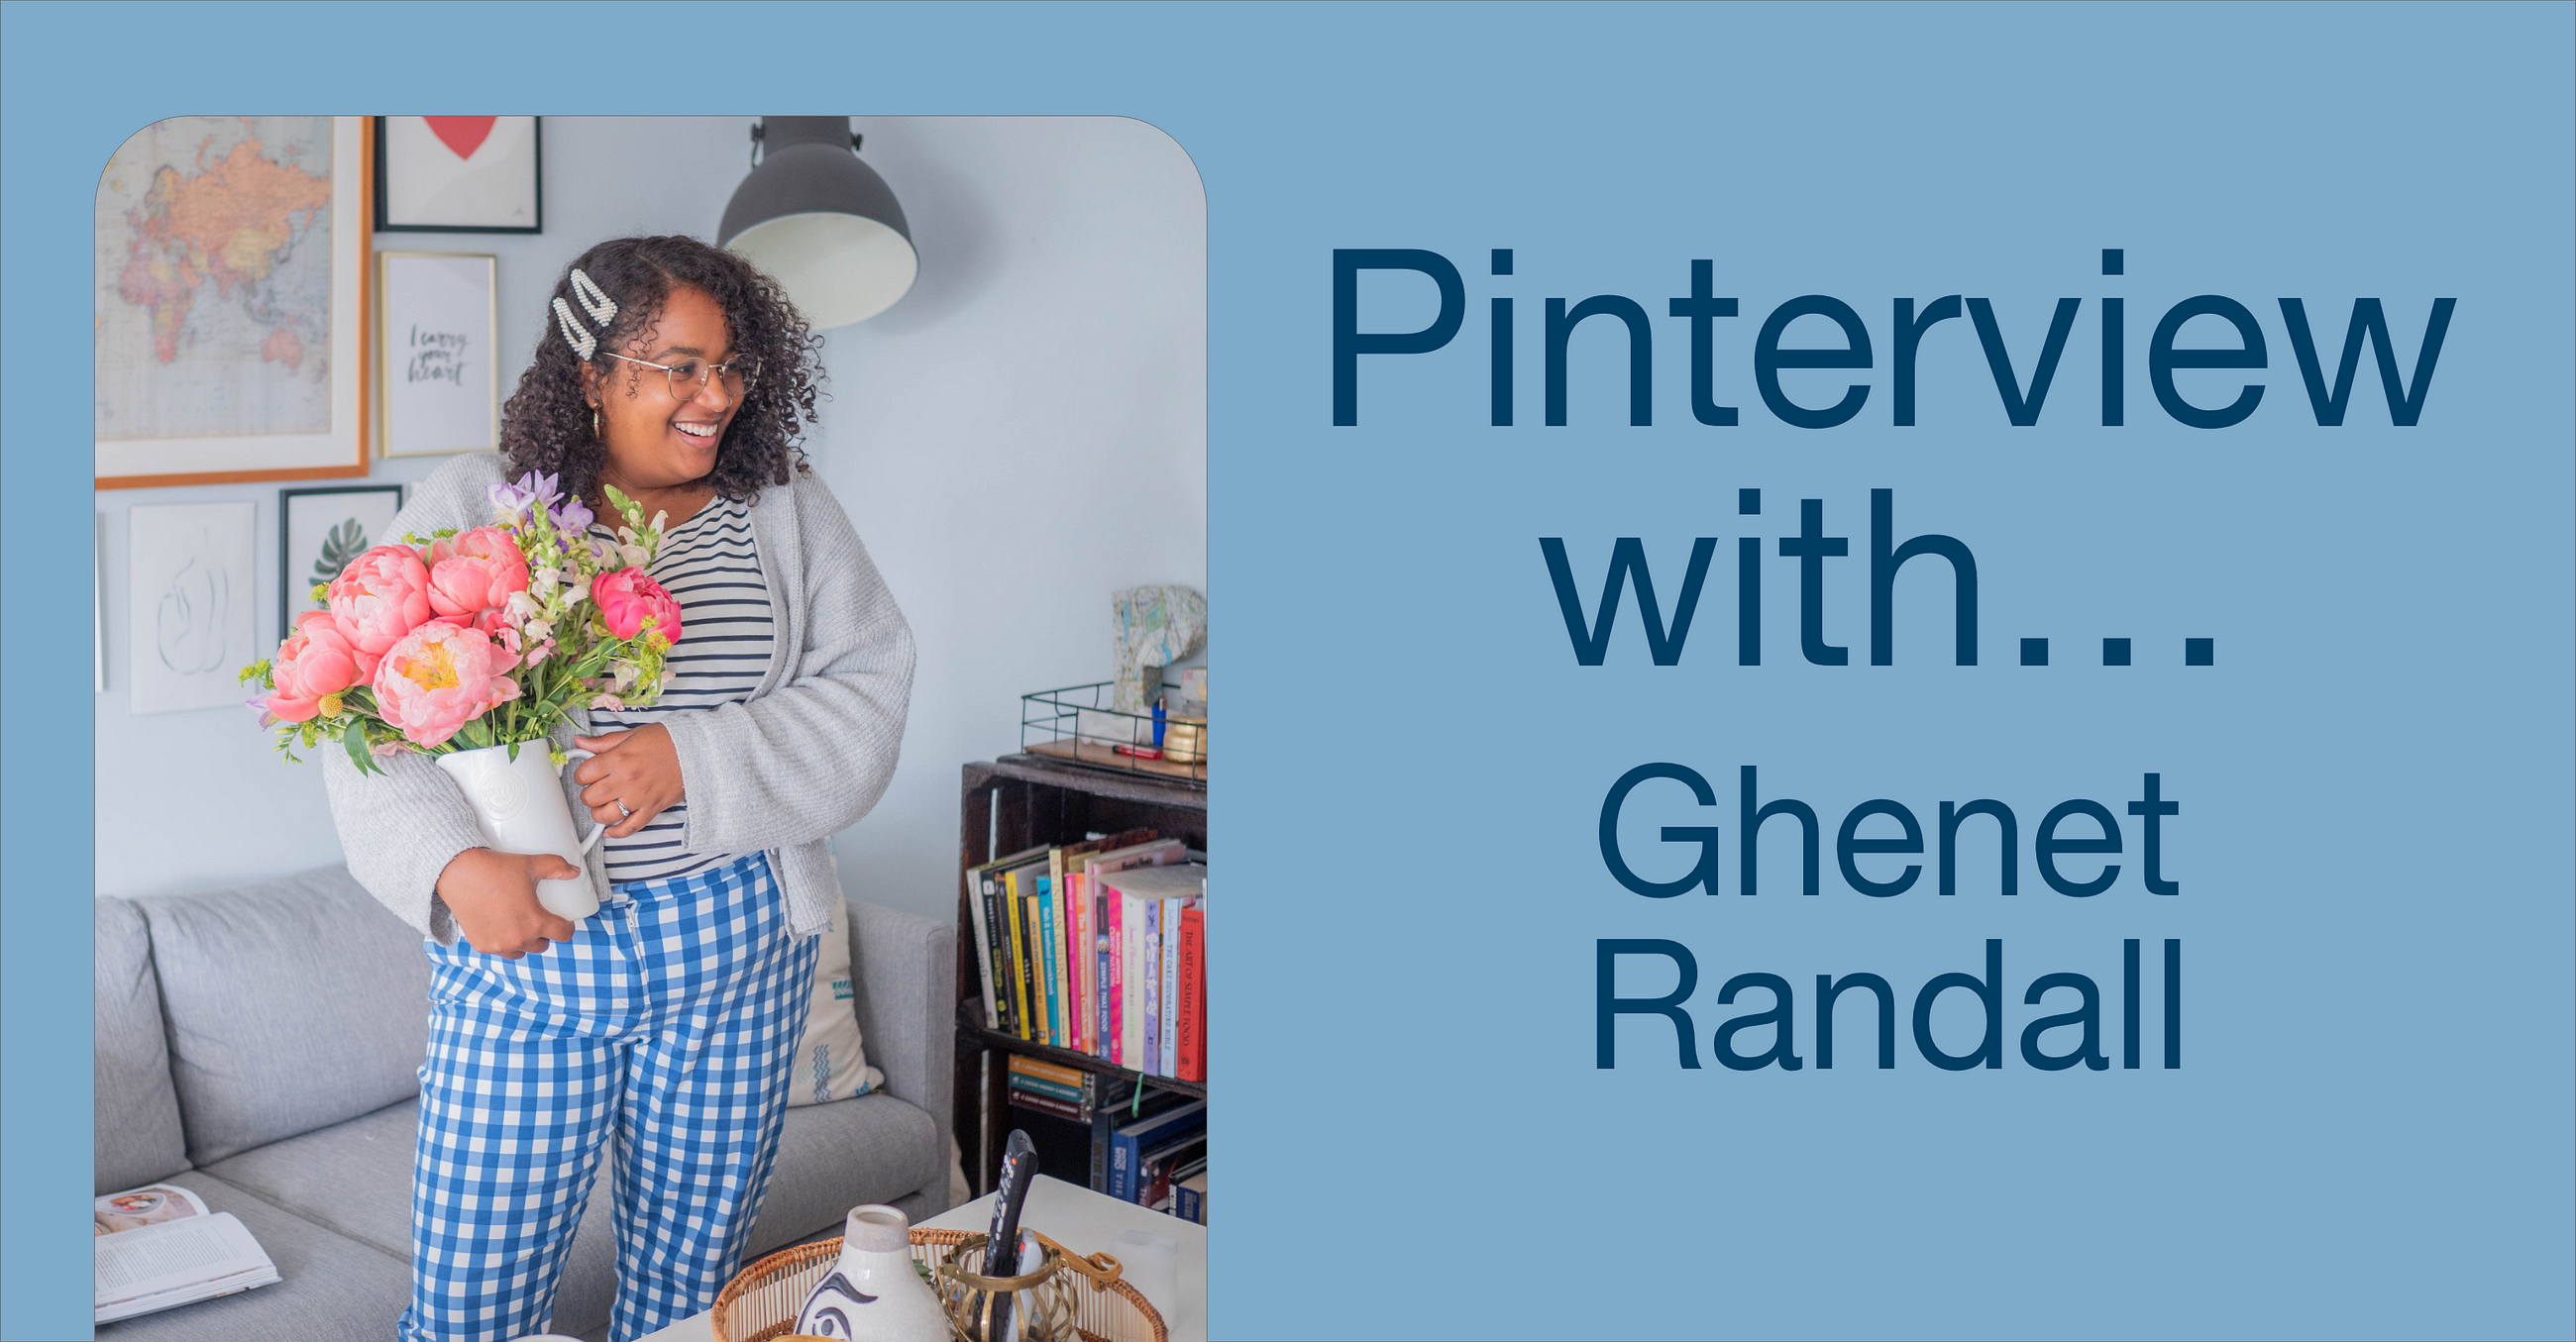 A Pinterview with… Ghenet Randall